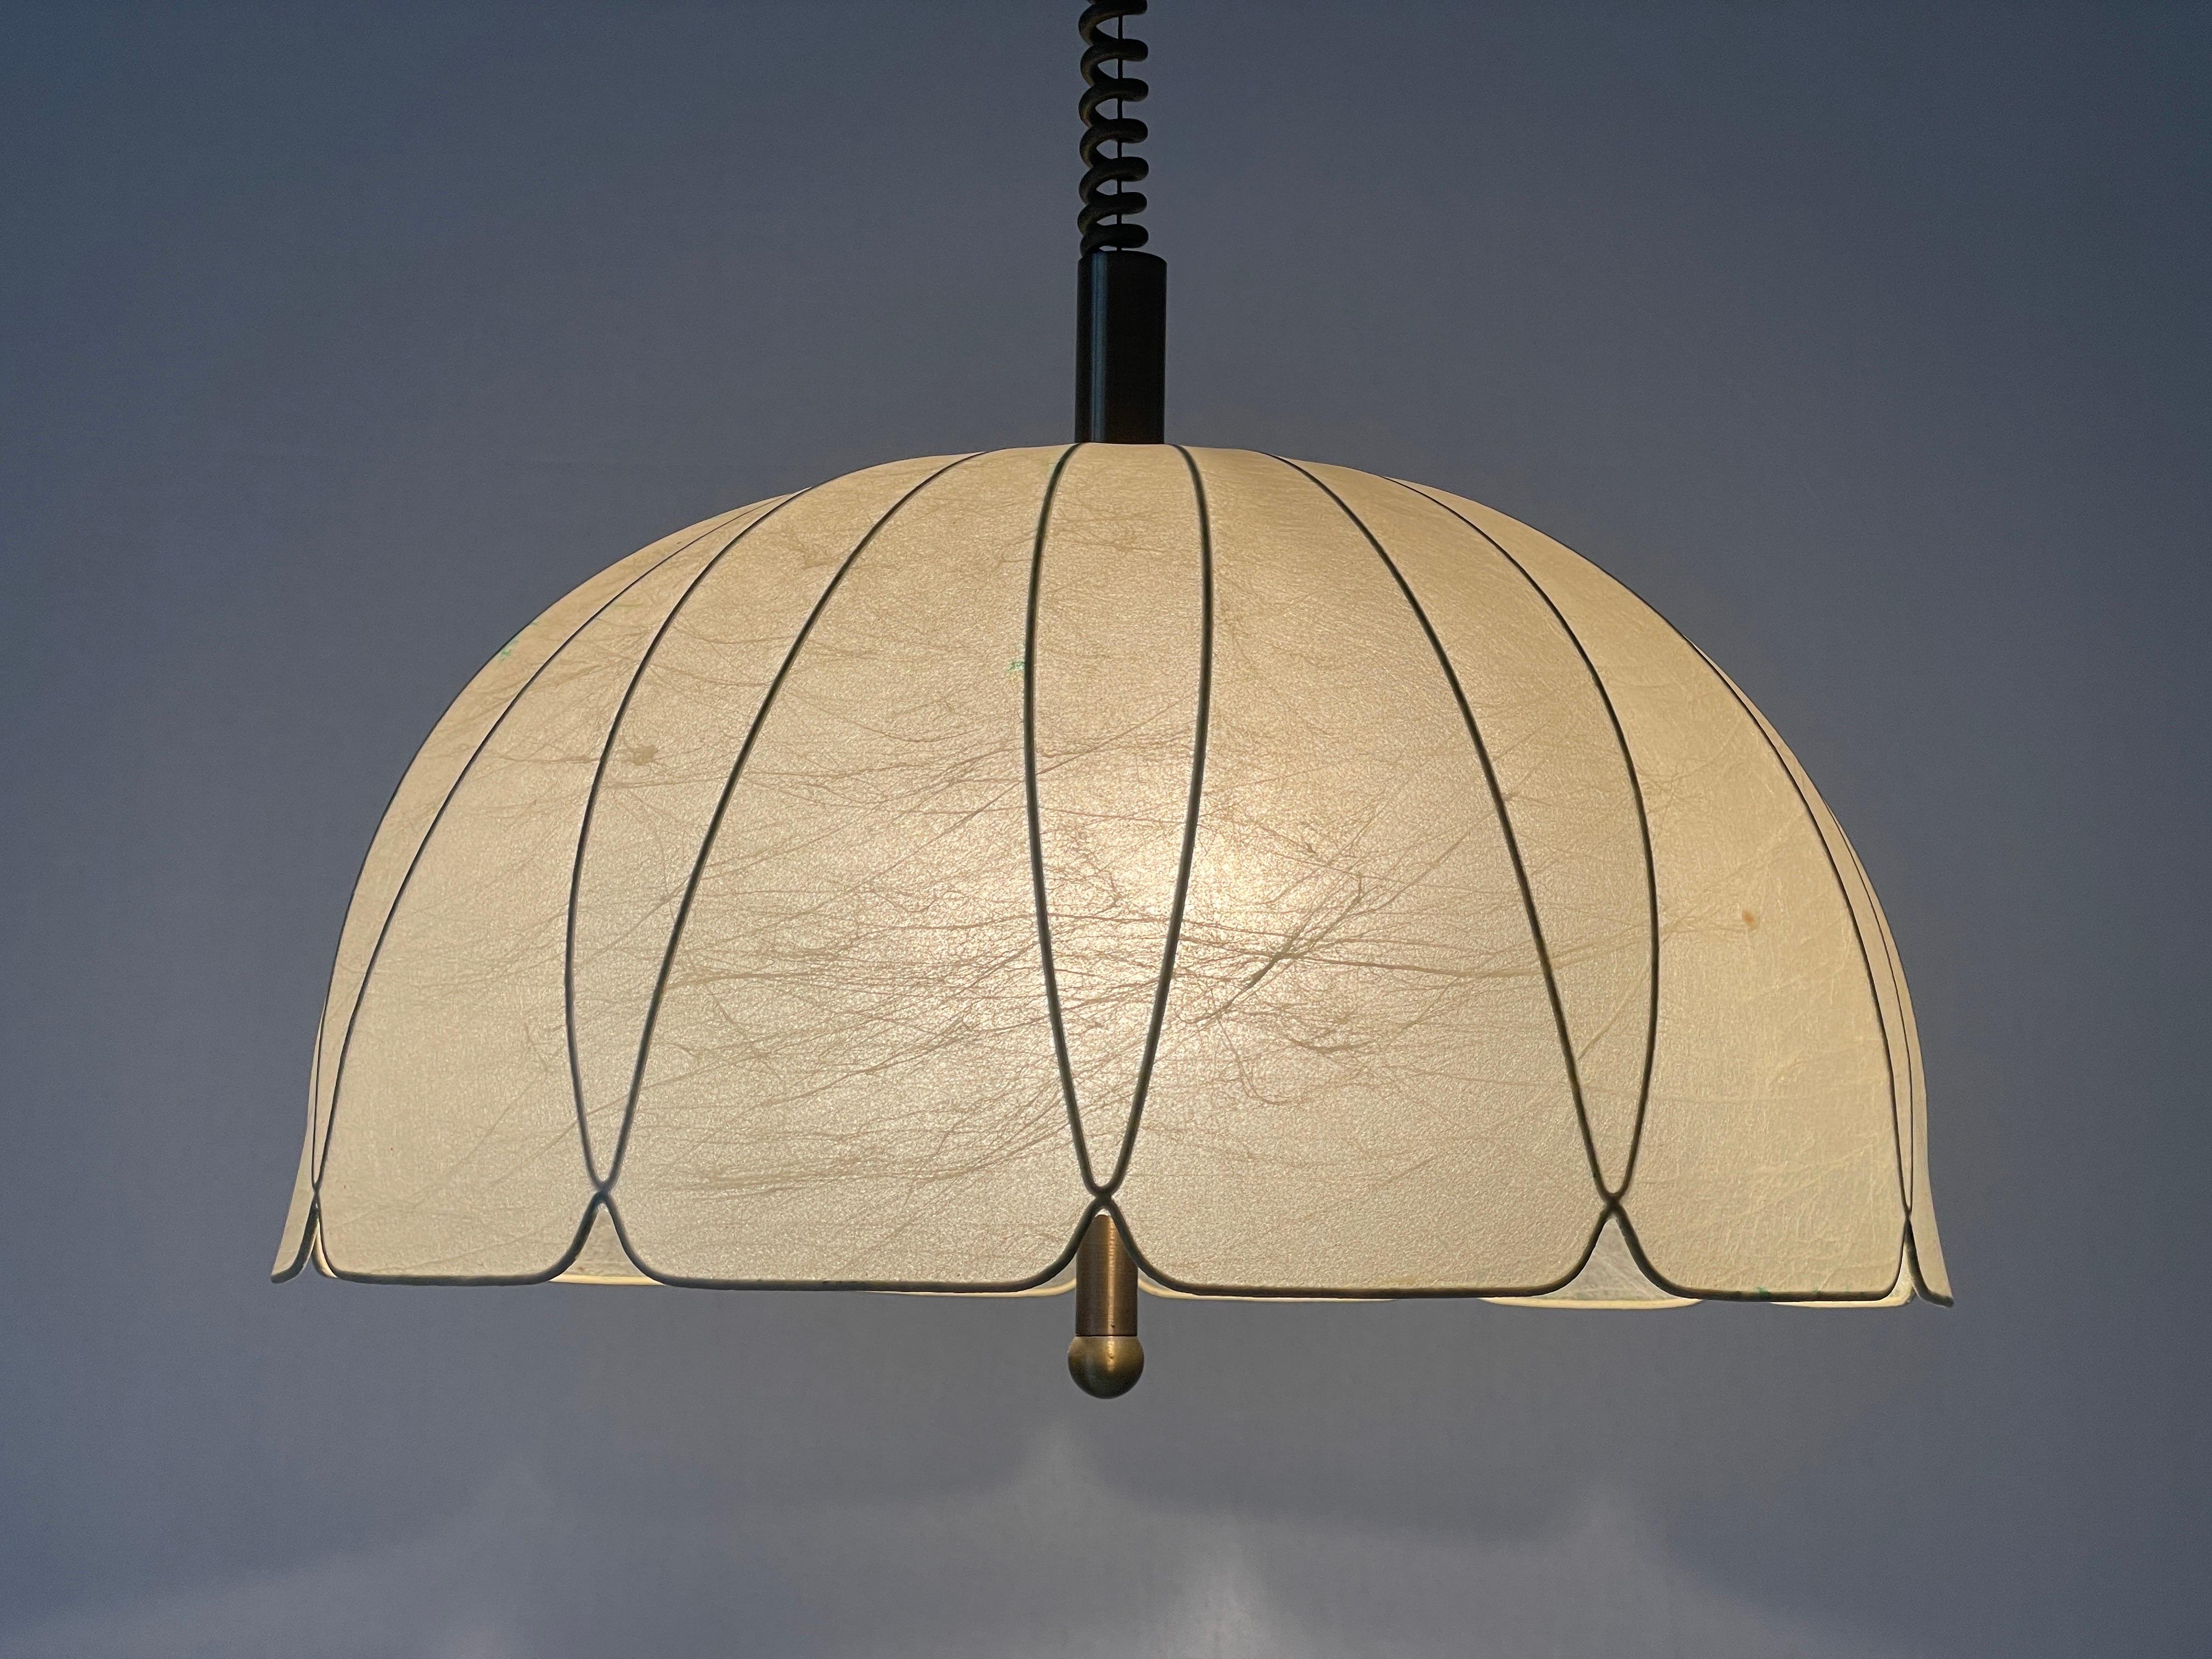 Flower Design Cocoon Adjustable Height Pendant Lamp by Goldkant, 1960s, Germany For Sale 3